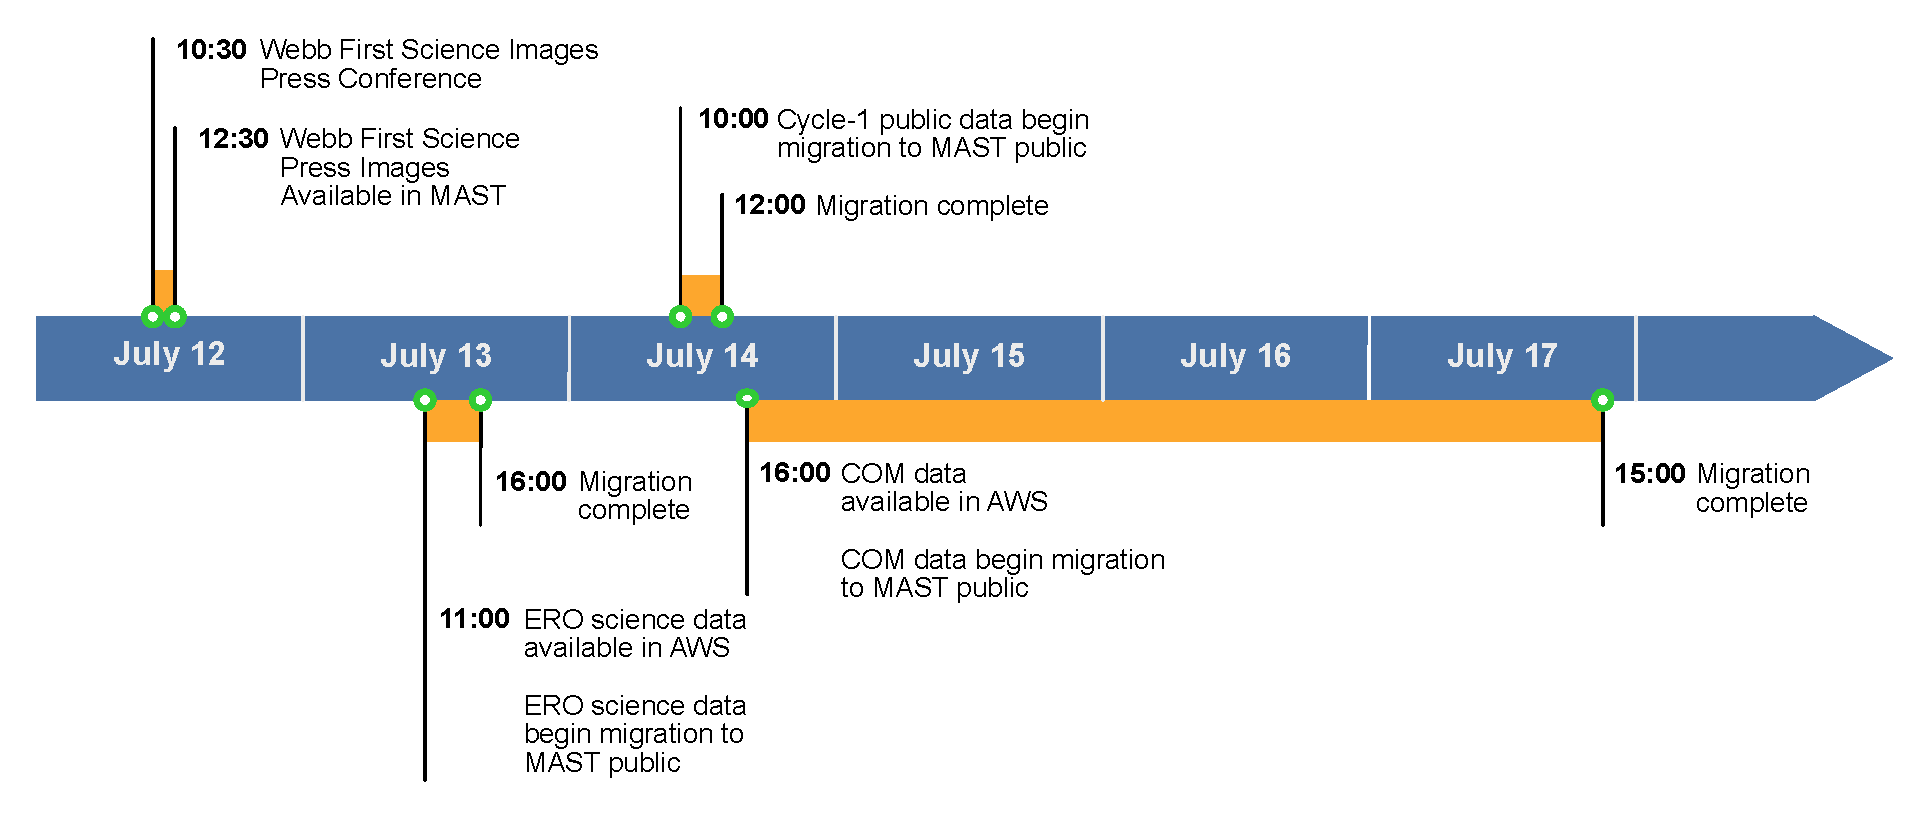 JWST data release timeline, beginning with the press conference on 12 July and culminating on 16 July with all data being available in MAST